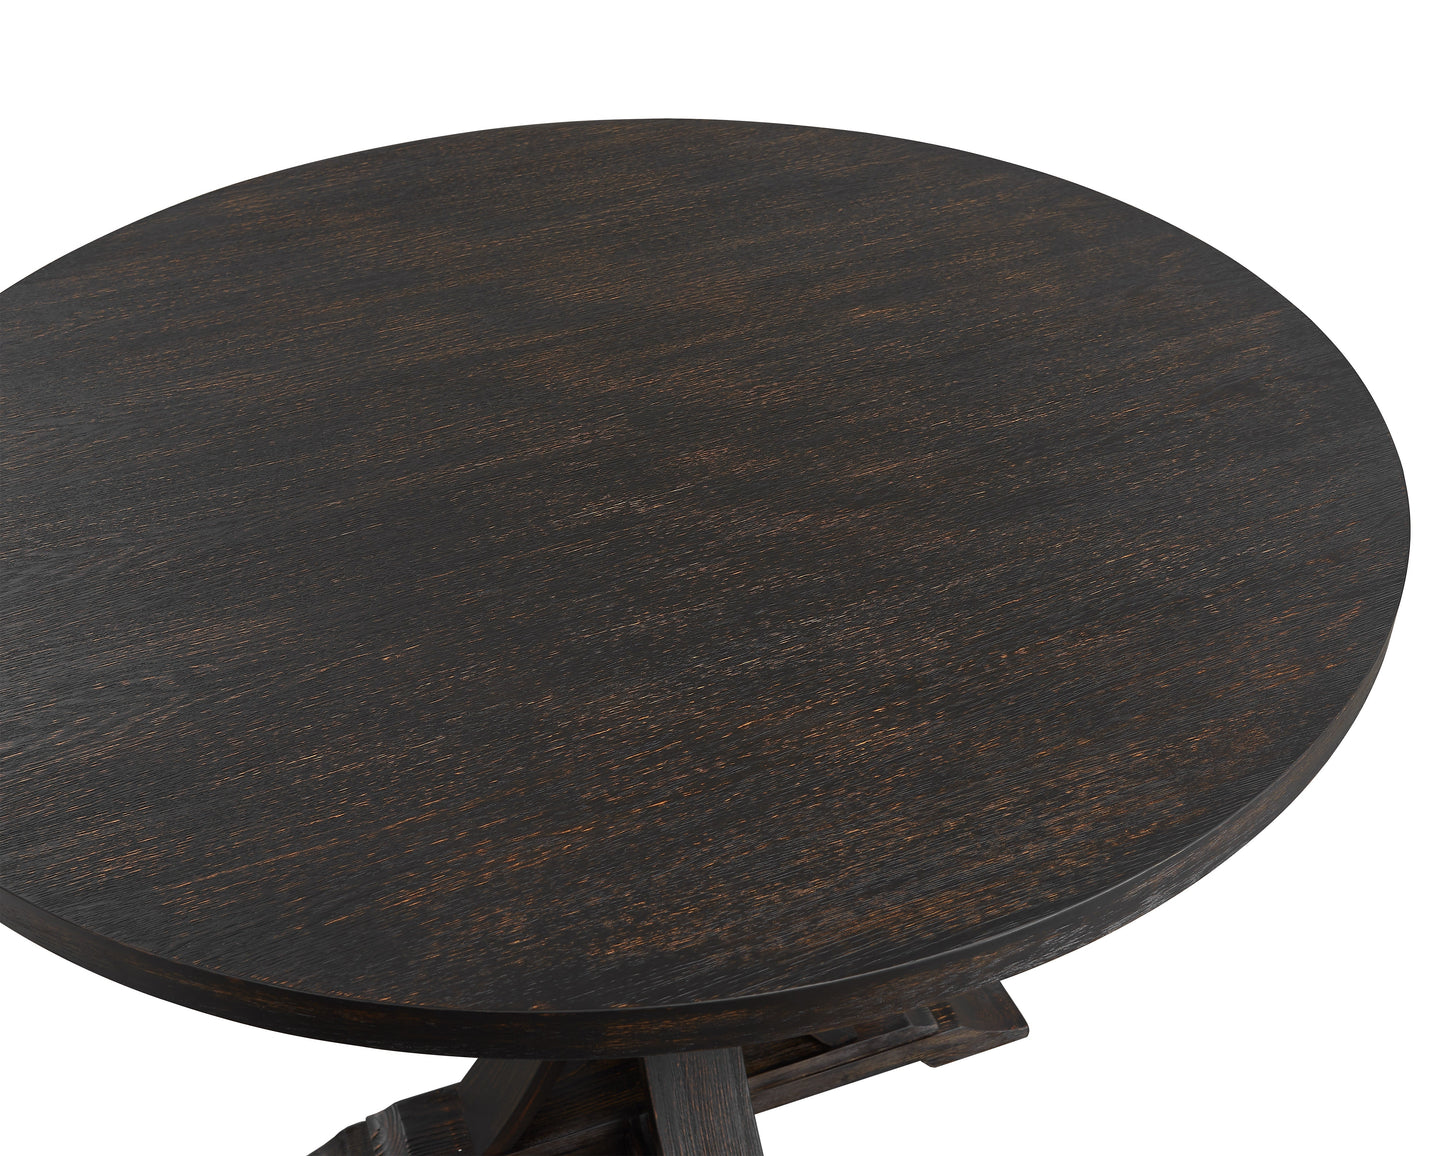 Distressed Black Finish Round Pedestal Dining Table